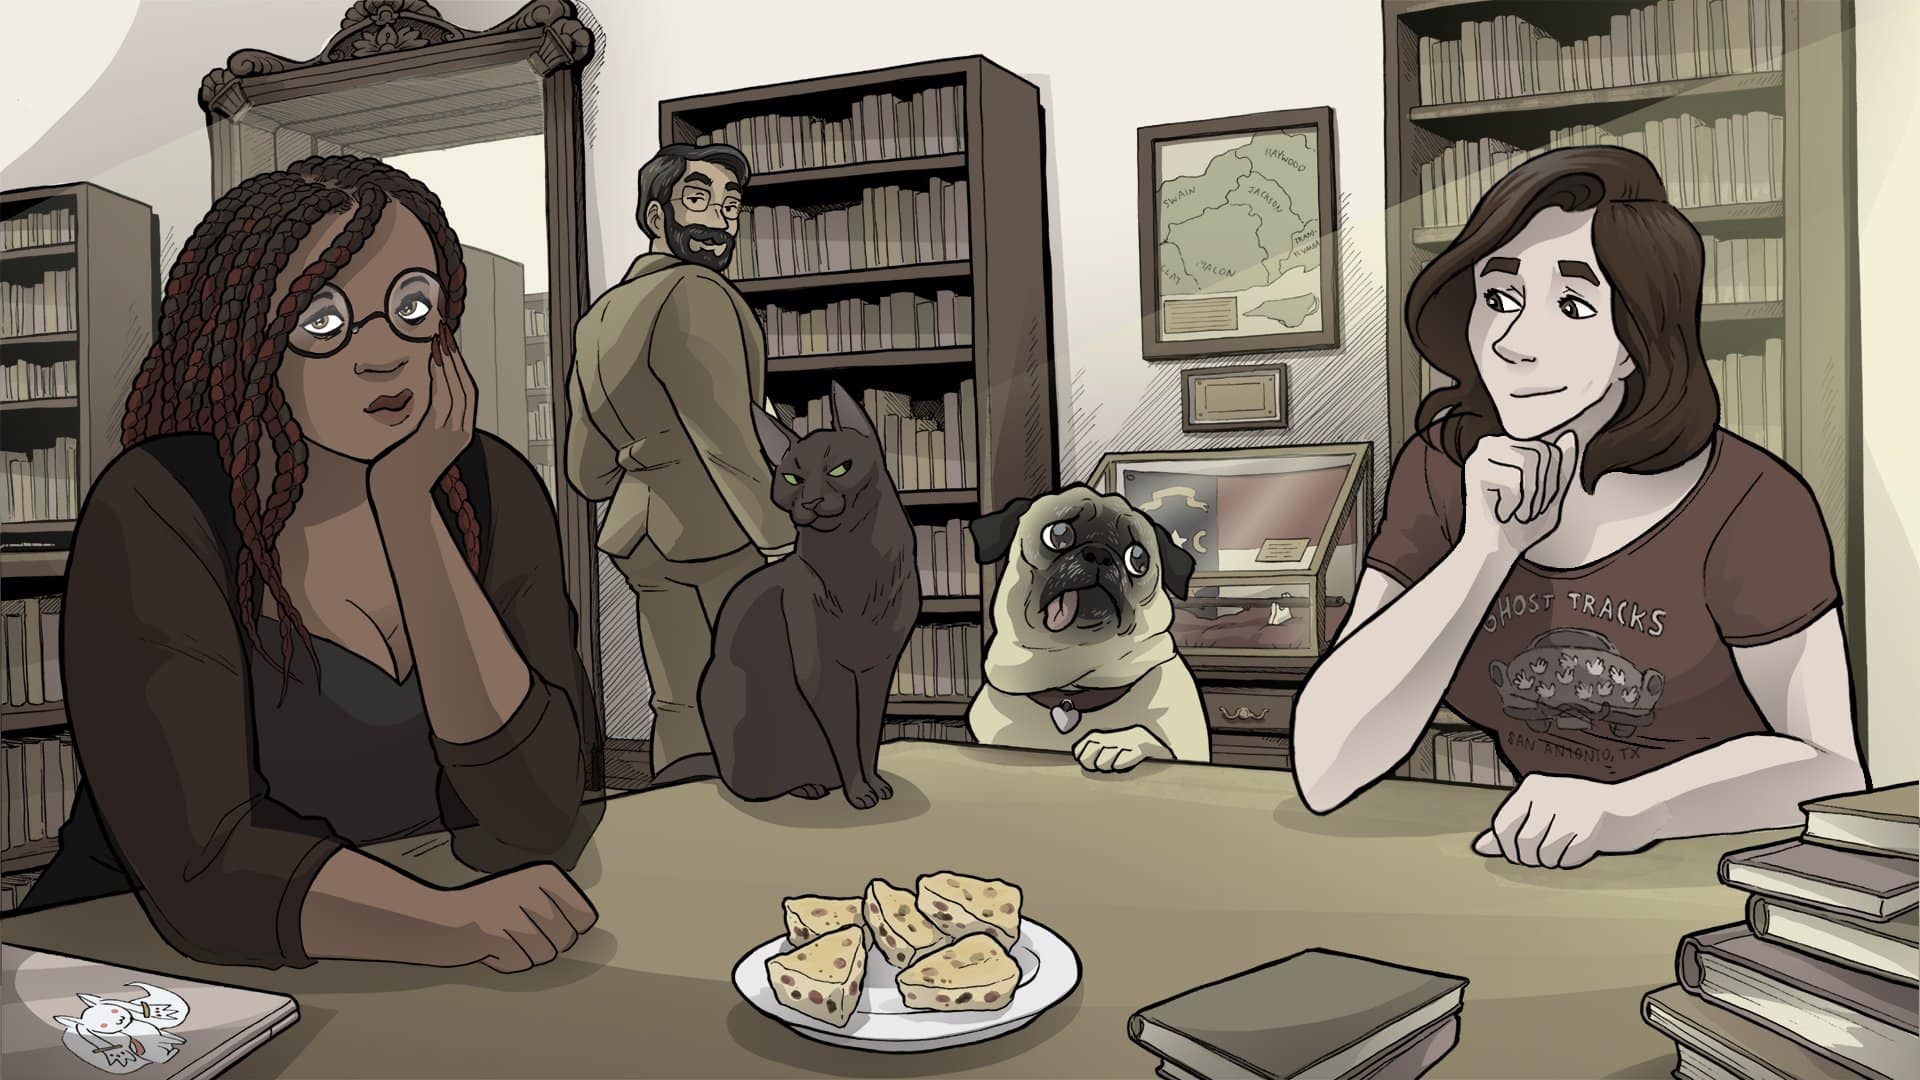 Screenshot of Scarlet Hollow characters in the library from left to right: Kaneeka, Oscar, Pixel, Gretchen, Stella